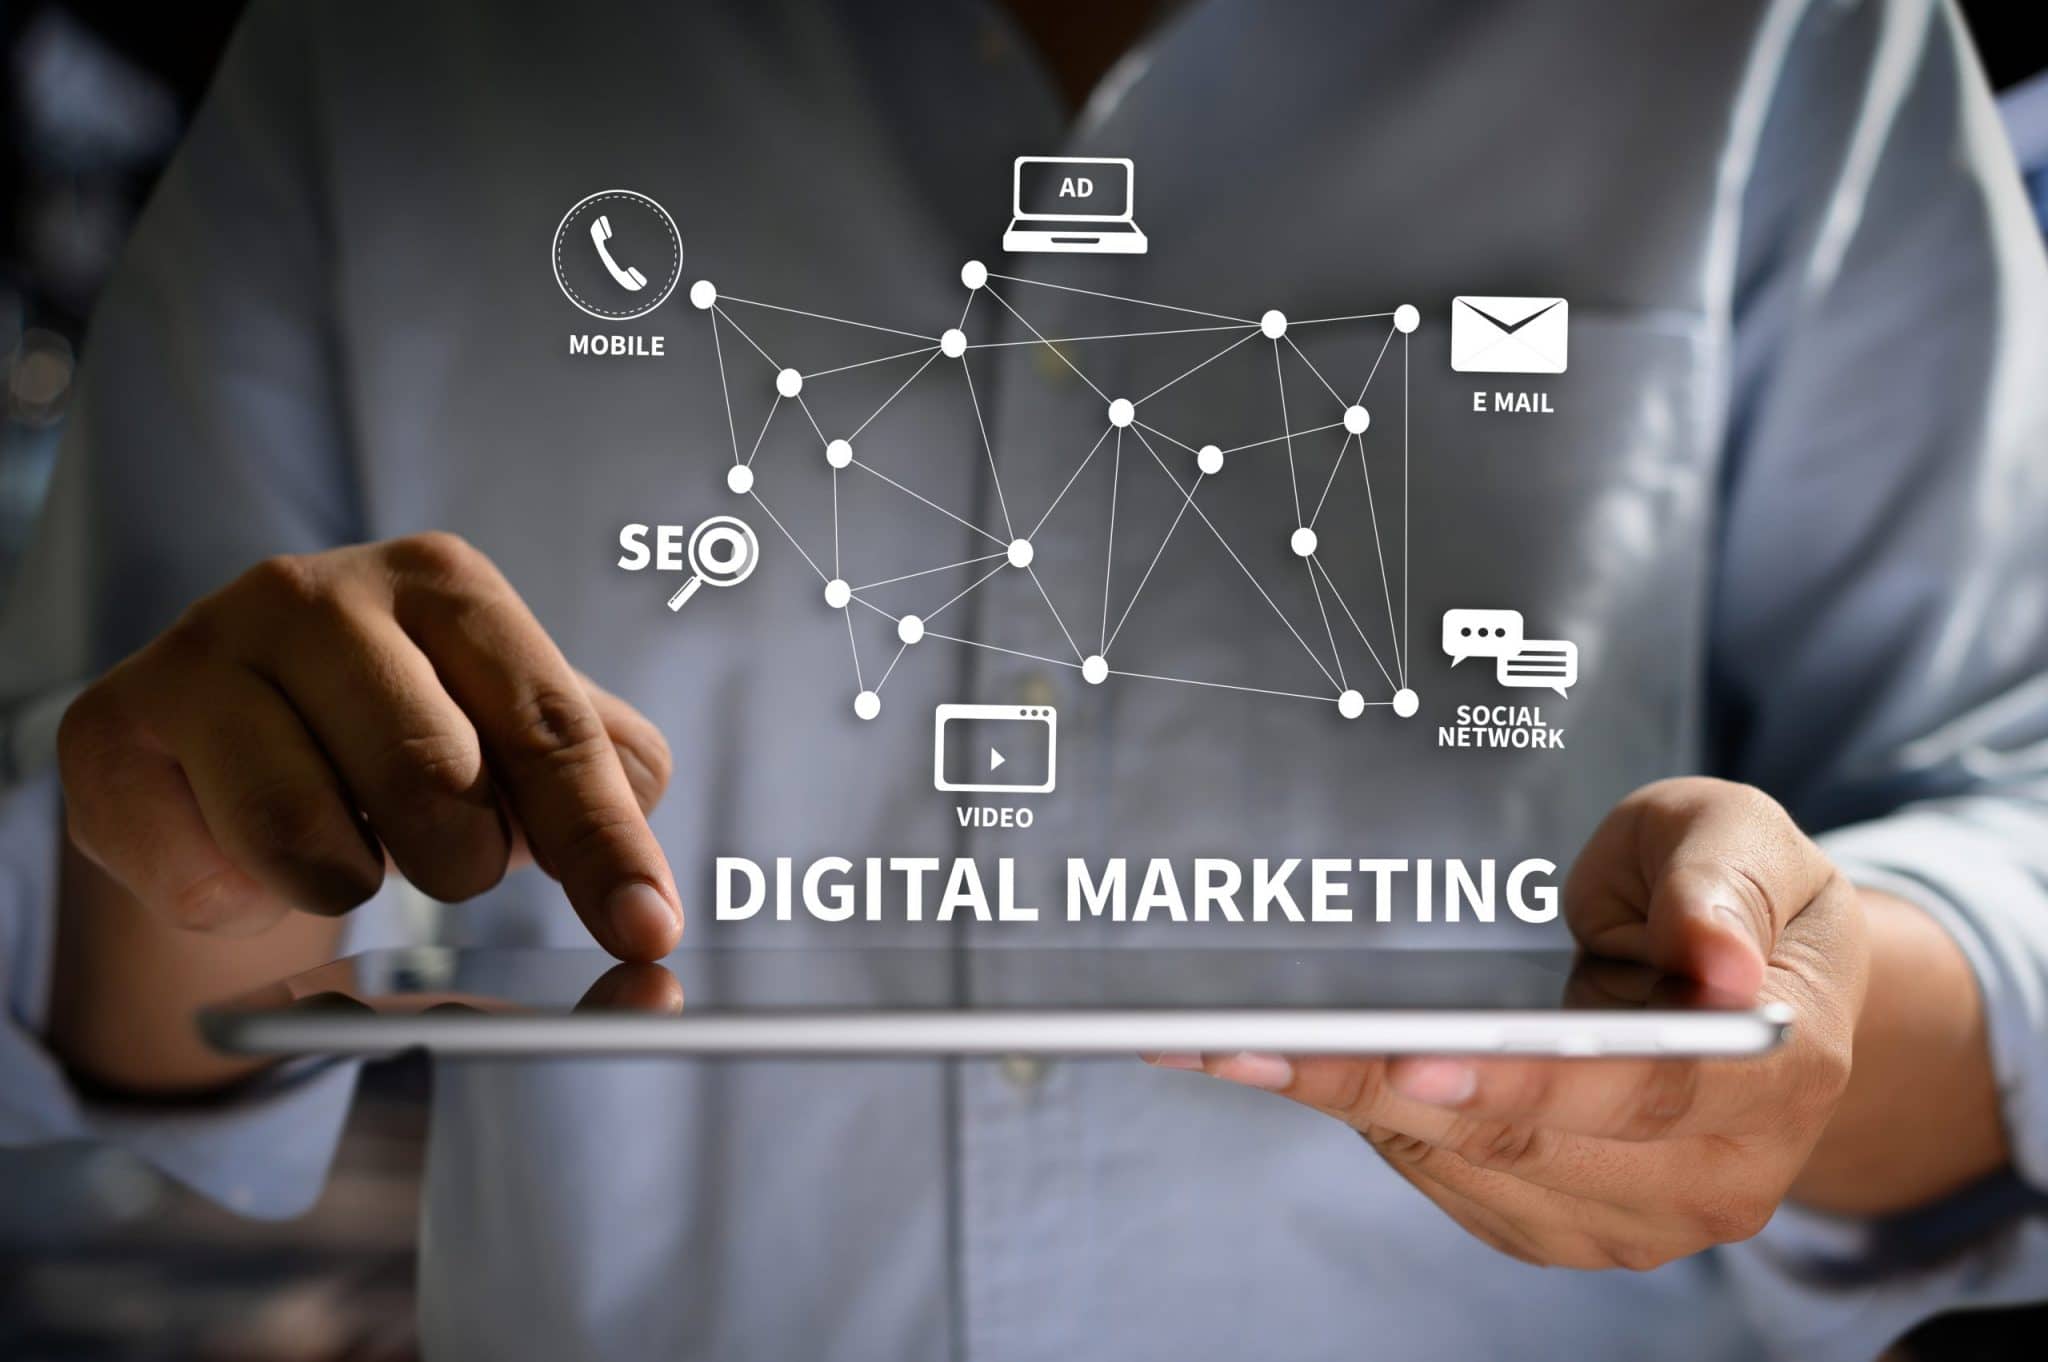 Digital Marketing Can Help Finance Businesses Grow - Here’s How